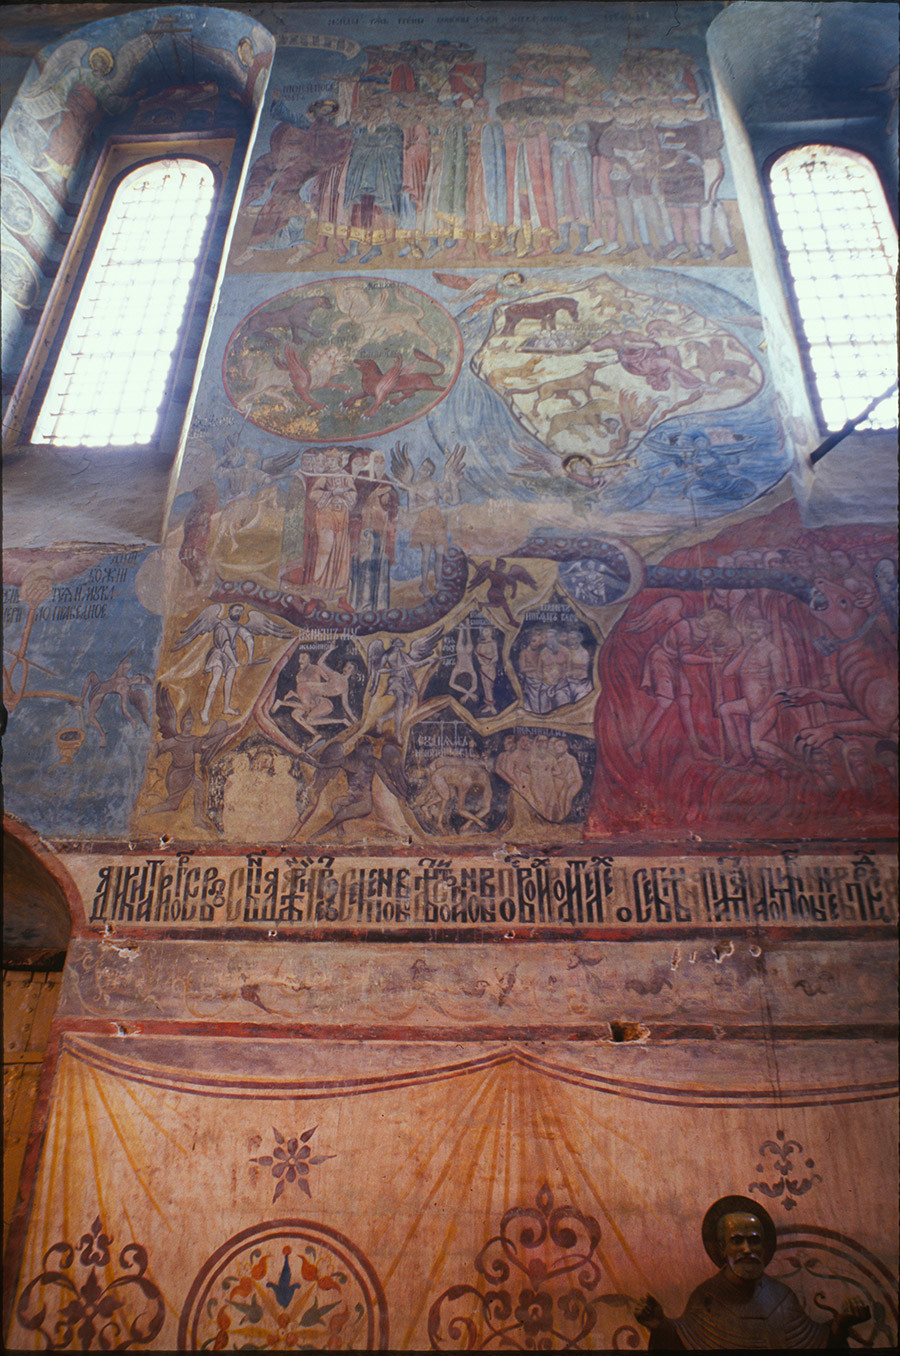 Cathedral of the Annunciation. West wall frescoes, Last Judgement with depiction of sinners in hell. June 26, 1999